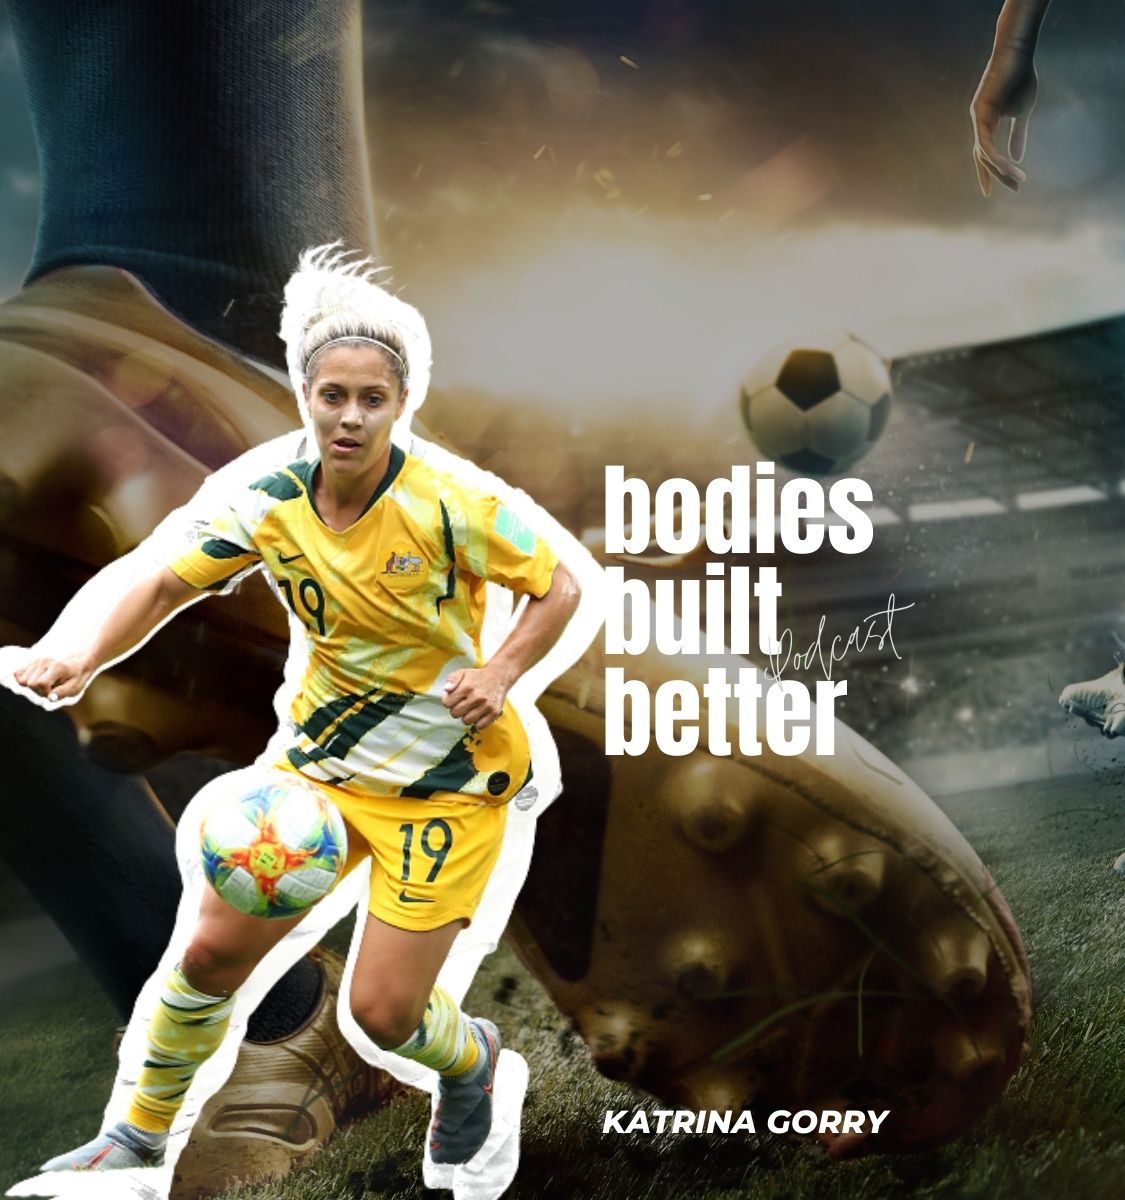 Kicking for Gold! TG chats with soccer star Katrina Gorry – Total Girl